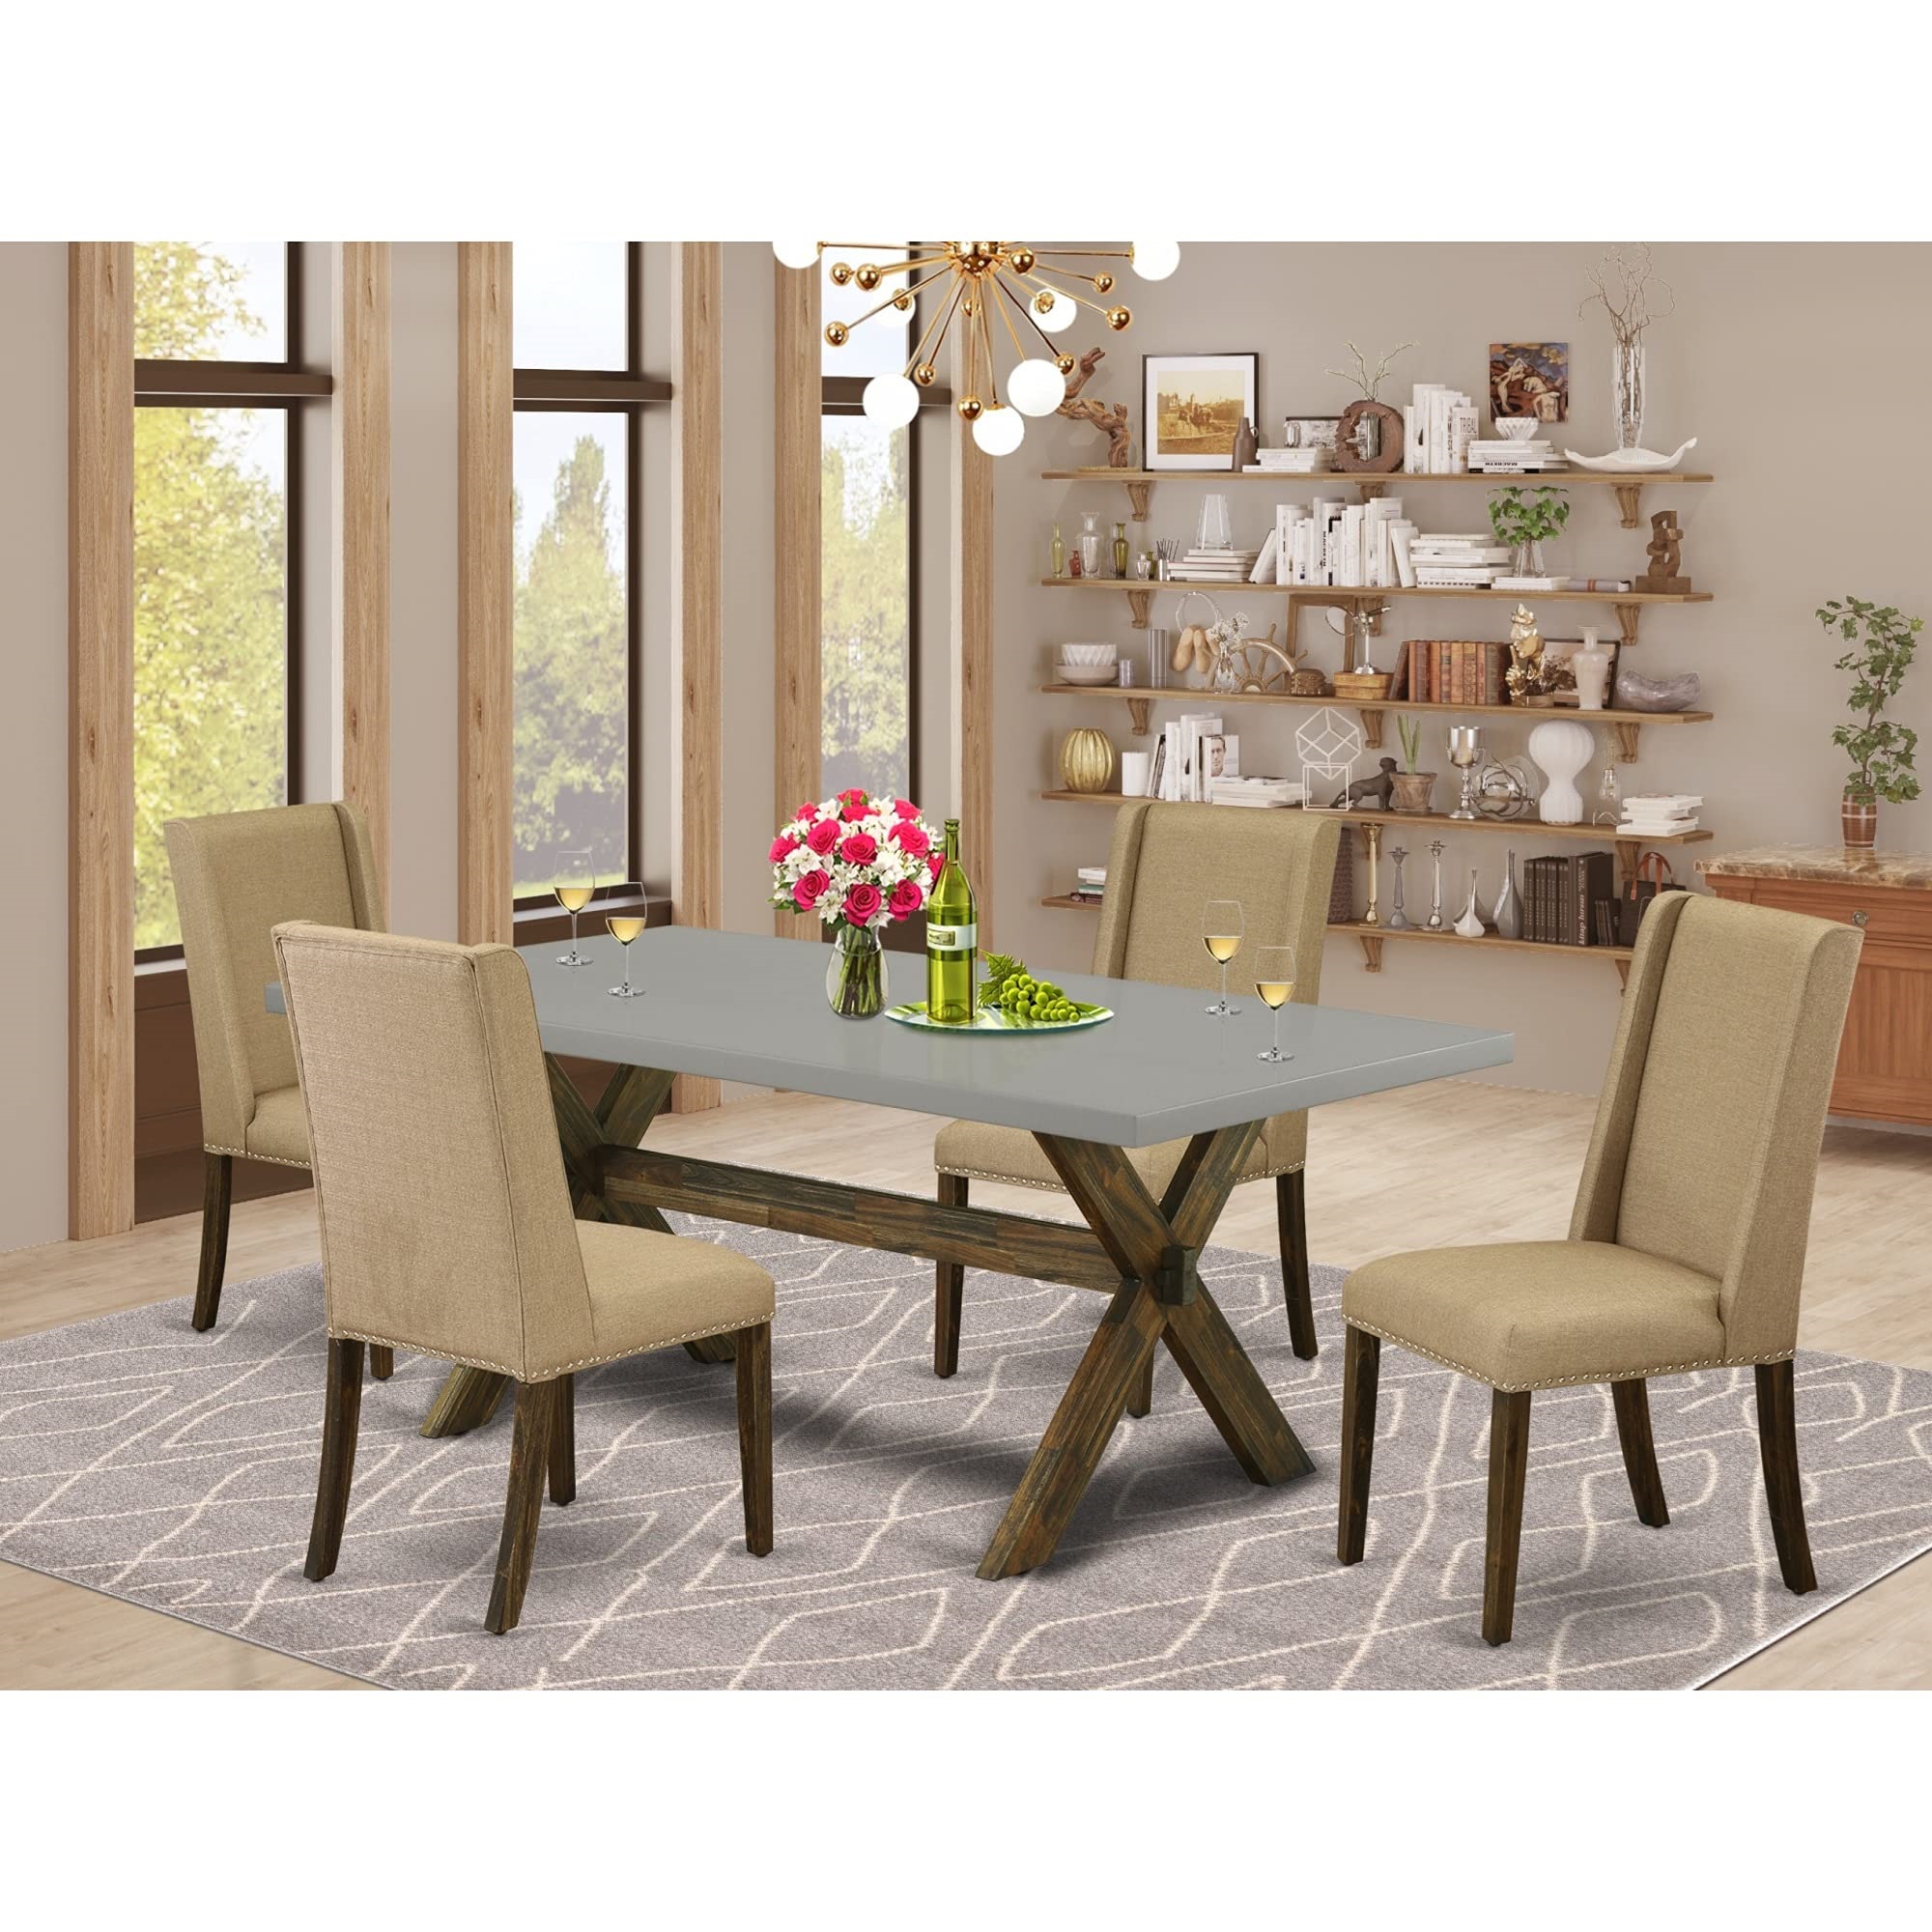 East West Furniture 5-Pc Dining Table Set Included 4 Parson Dining room chairs Upholstered Seat and Stylish Chair Back and Rec